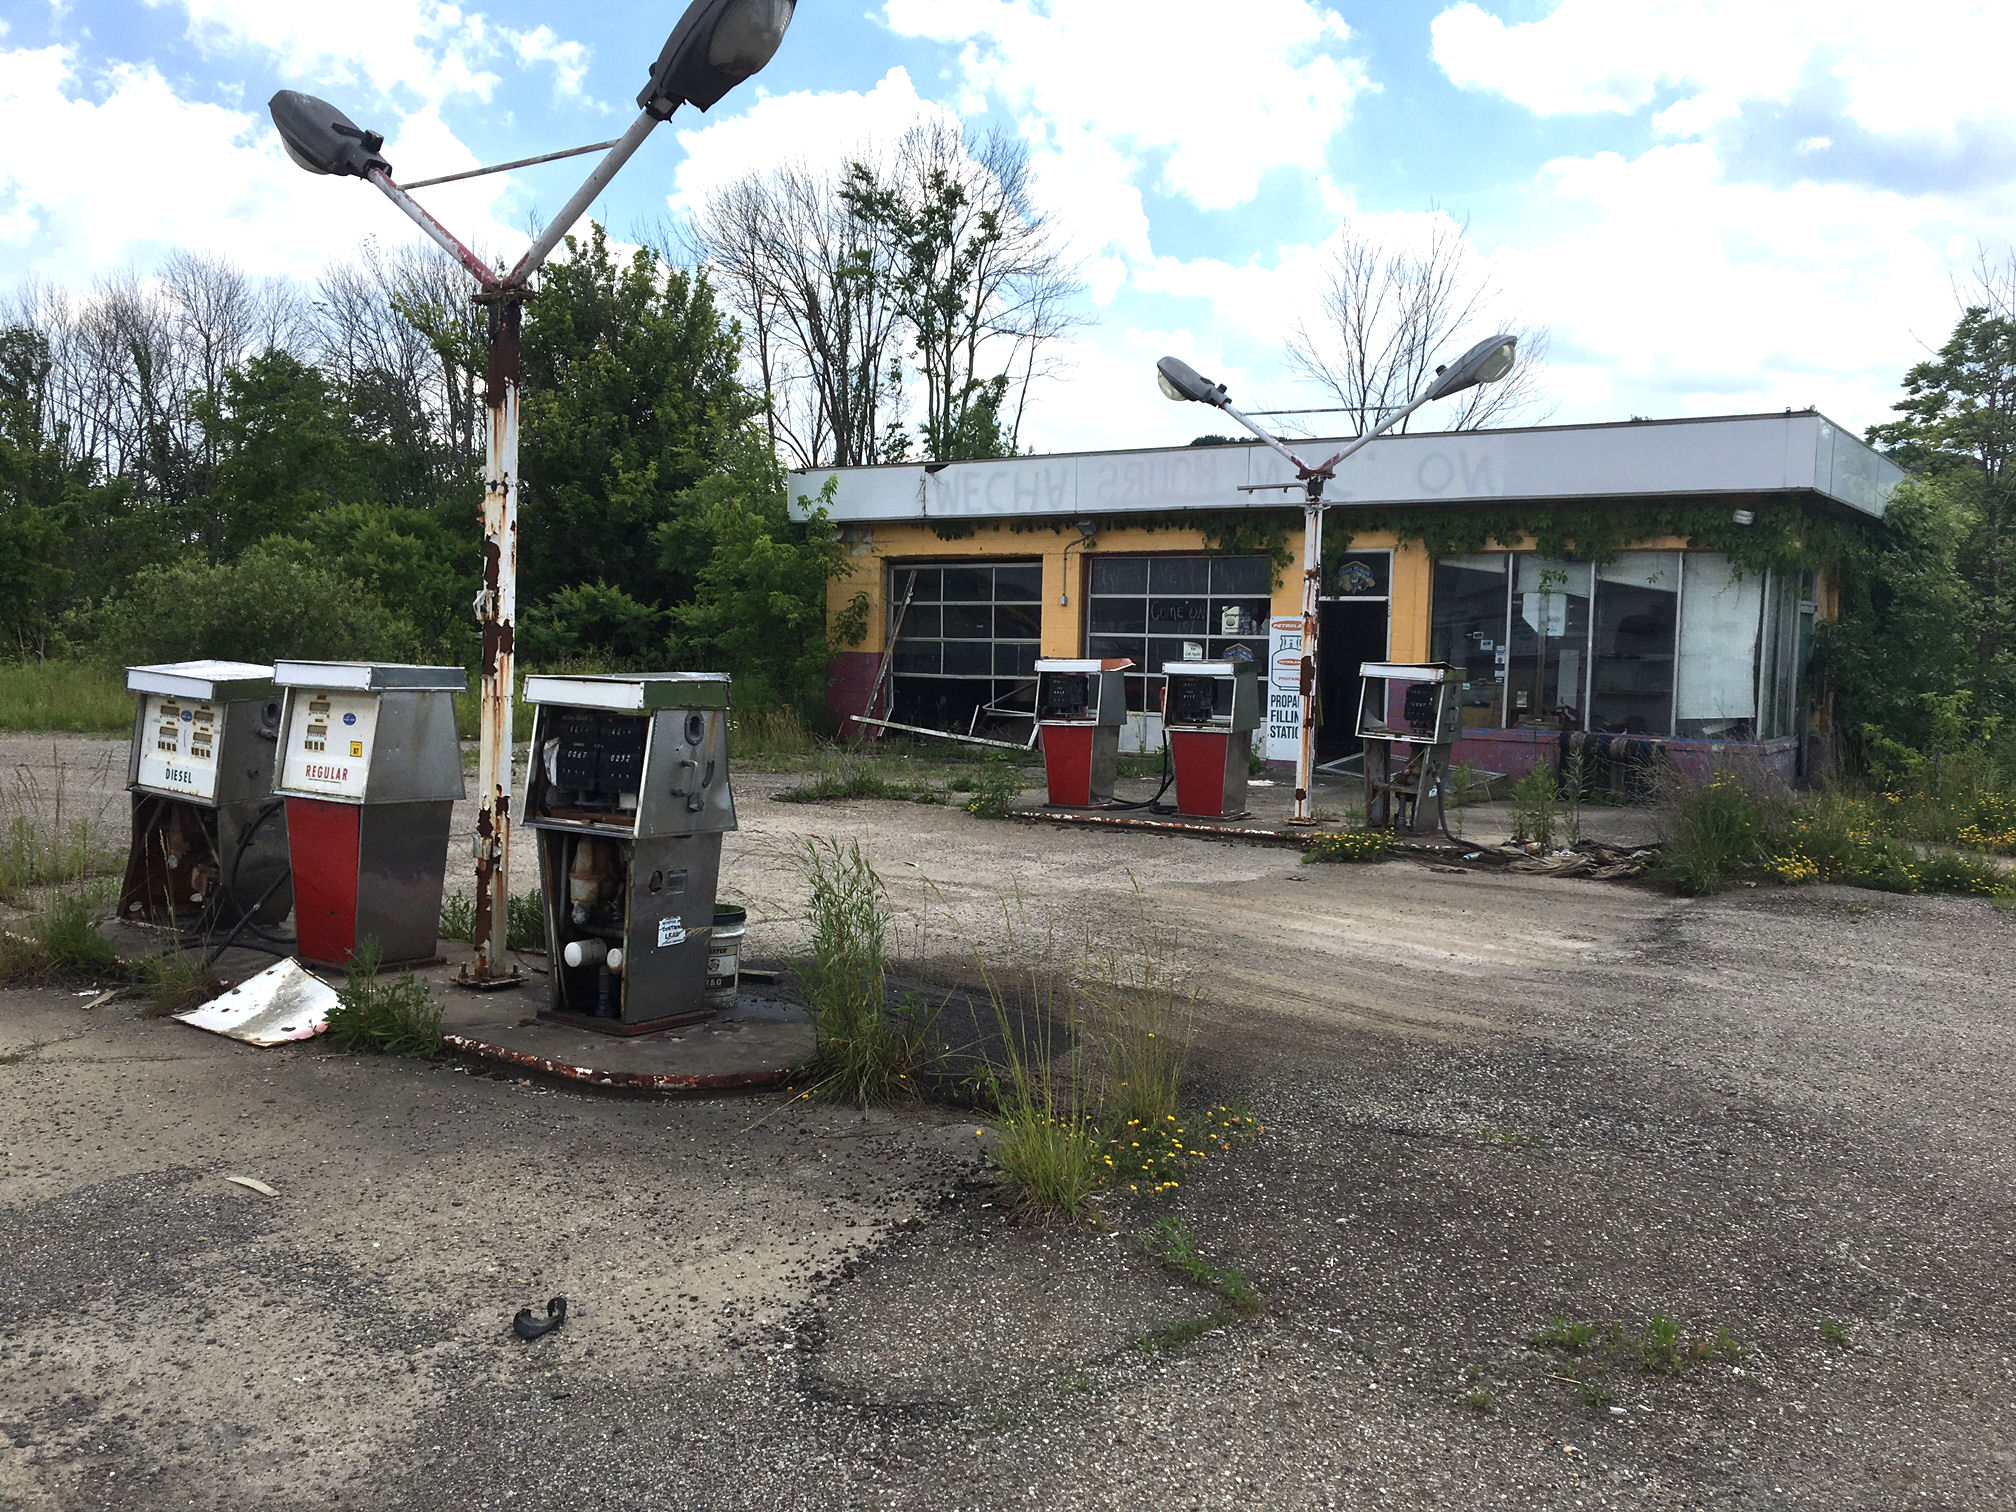 Abandoned gas station and pumps with vegetation growing through the concrete and parts of the building